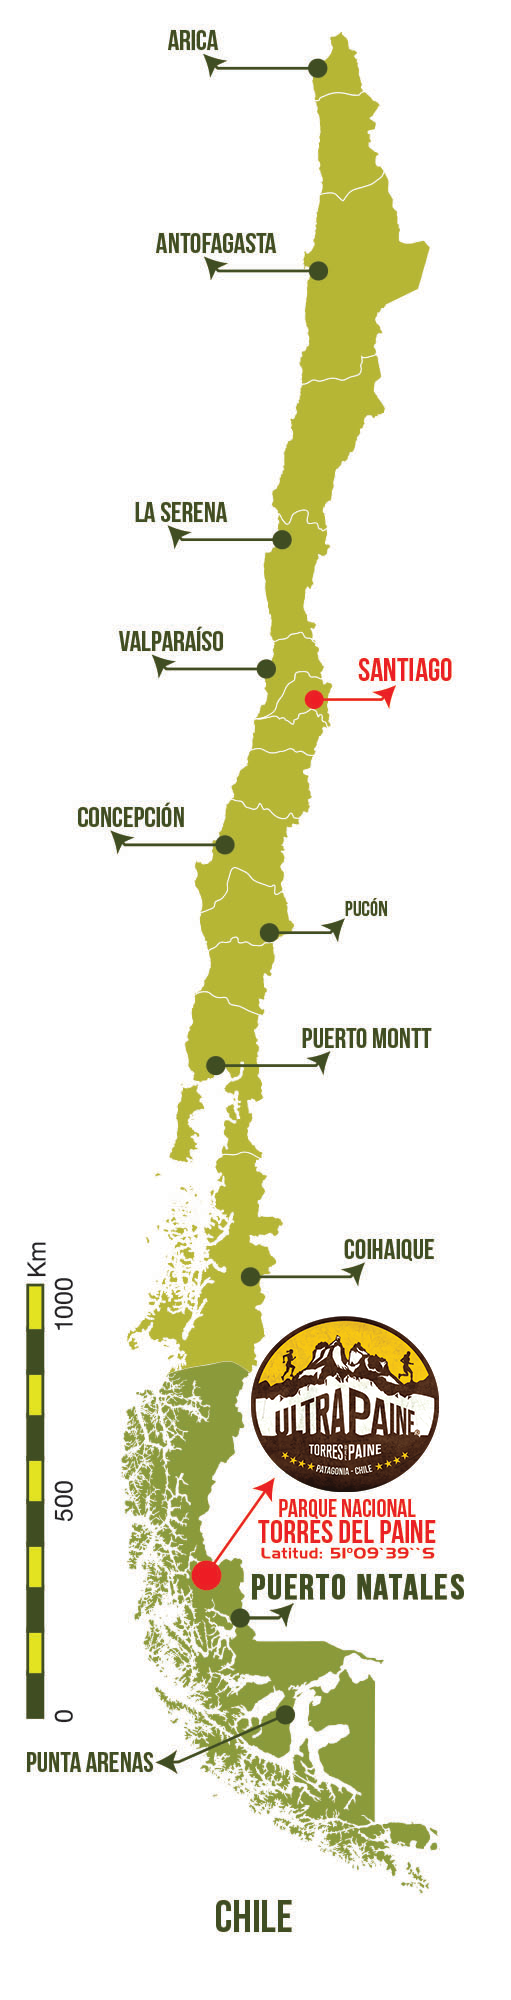 Ultra Paine General Map of Chile 2021 Patagonia, Chile